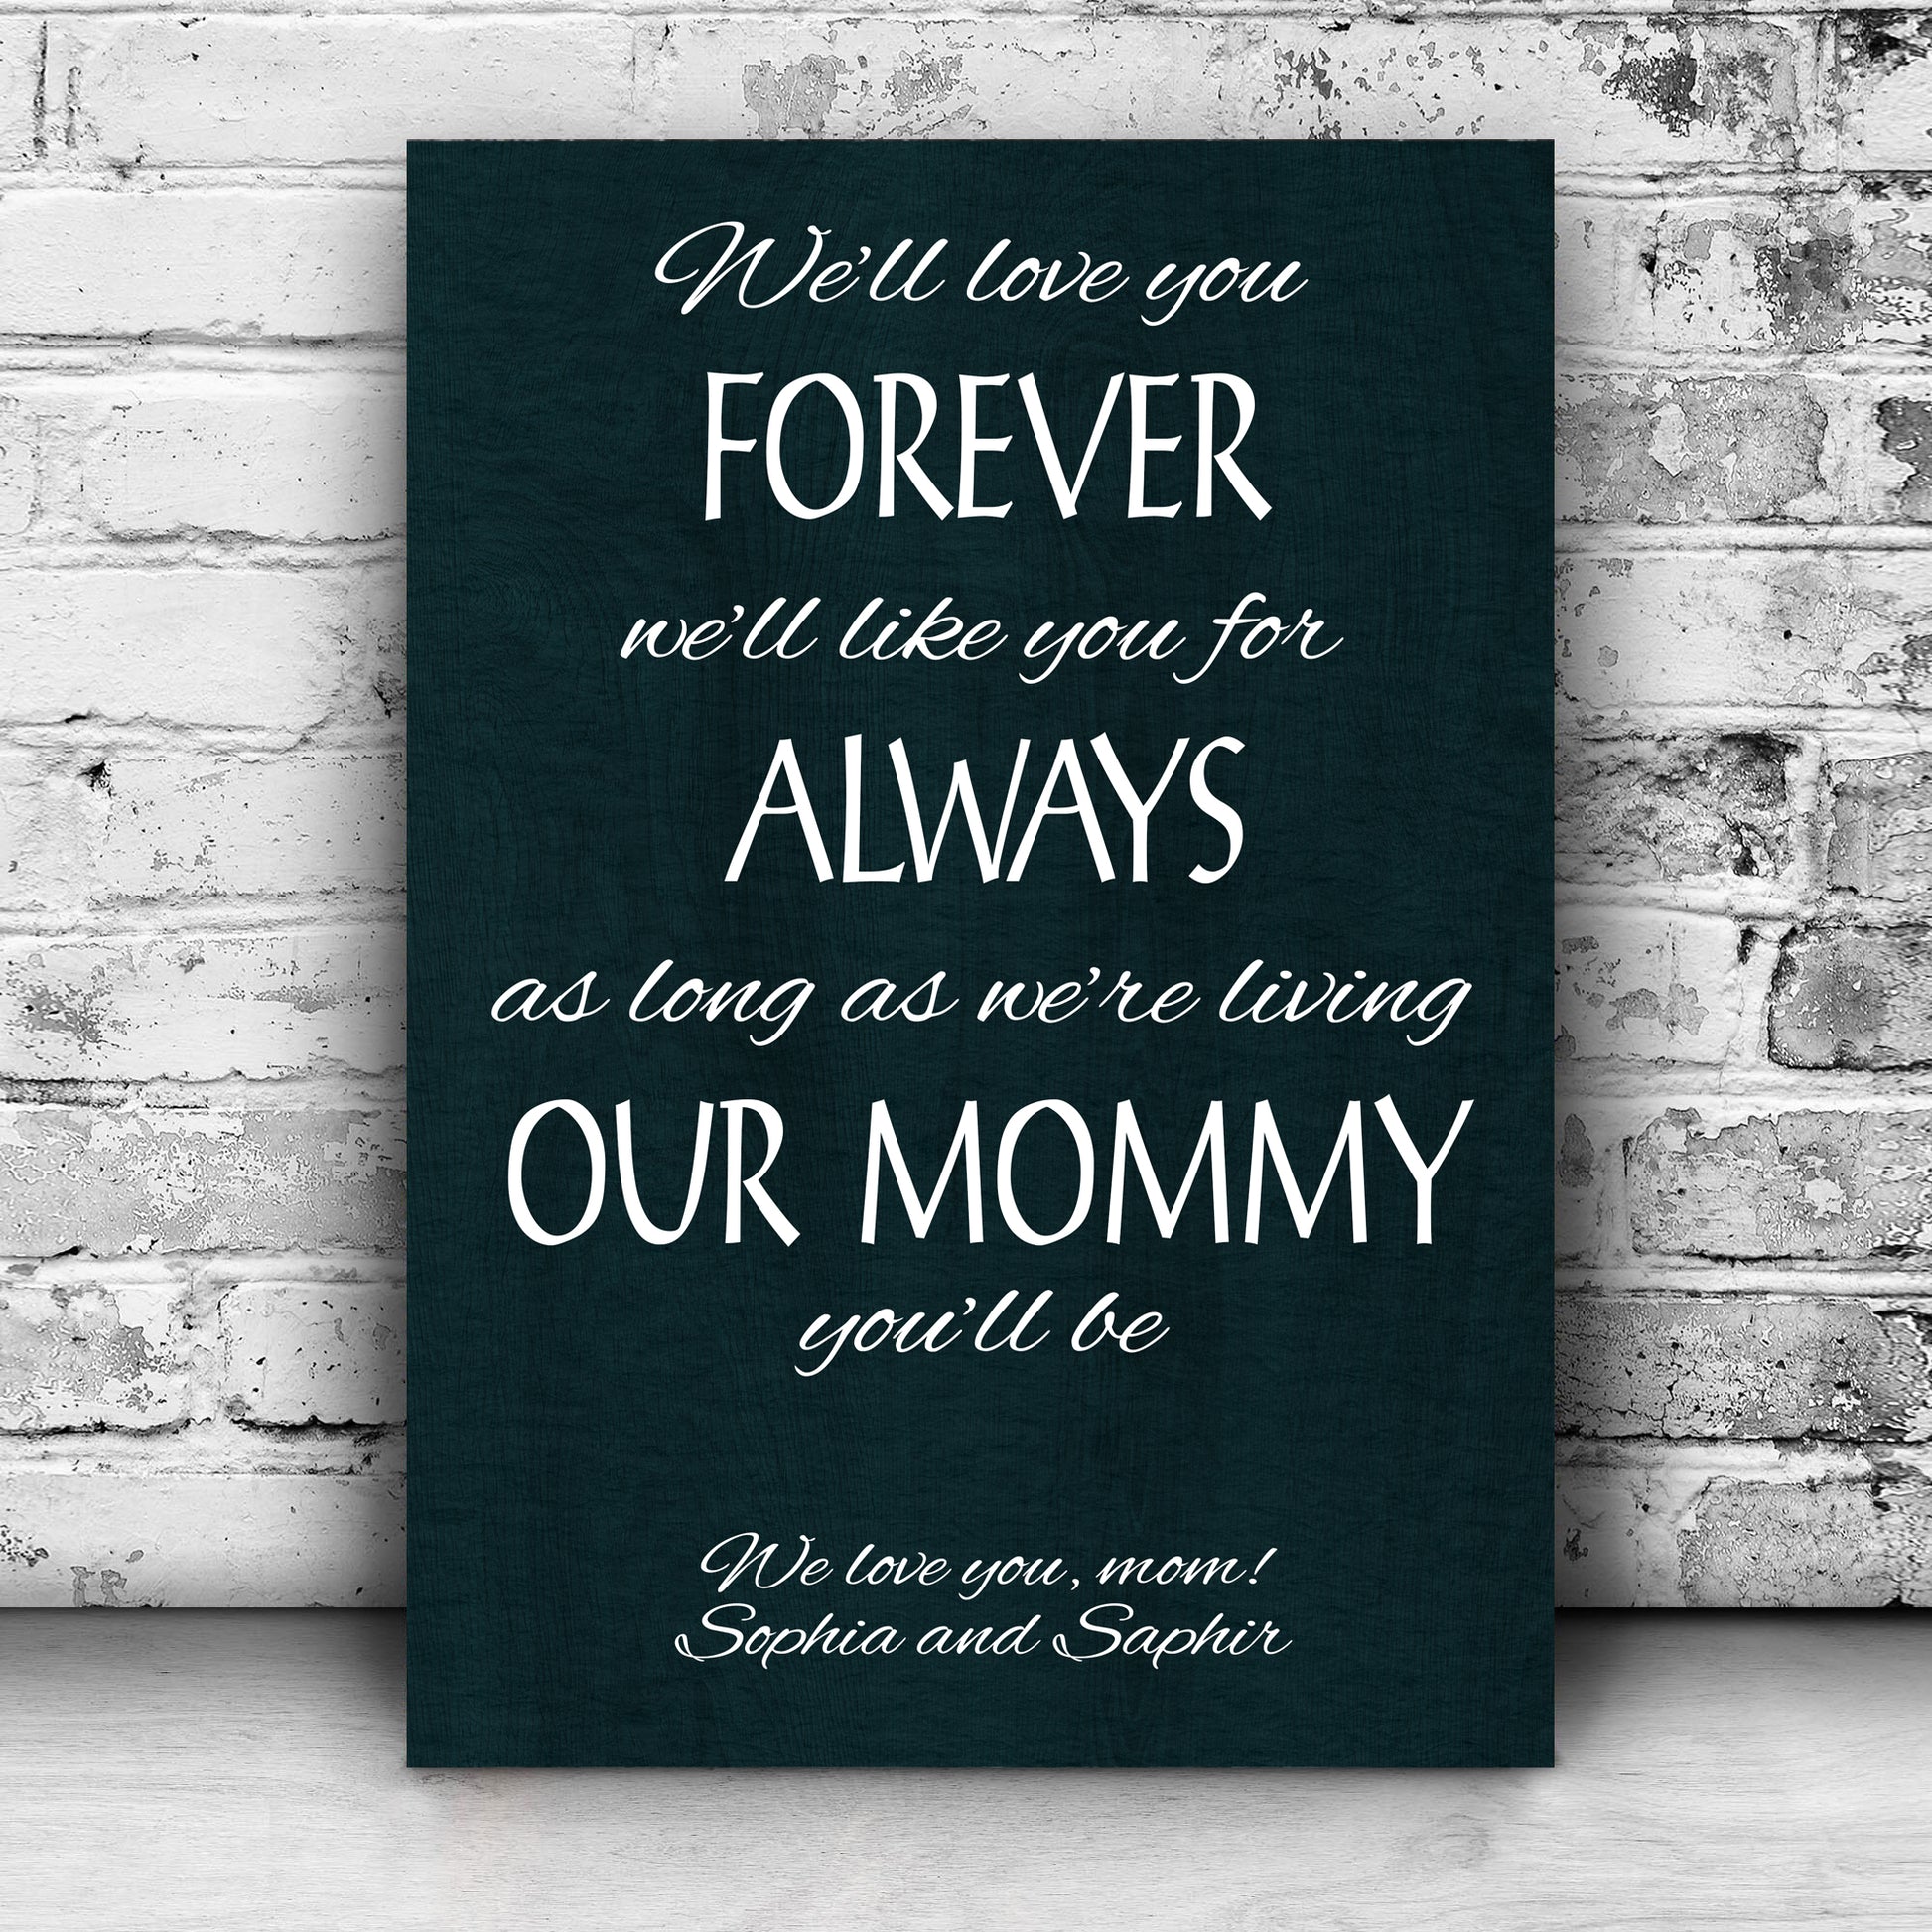 As Long As We're Living You'll Be Our Mommy Happy Mother's Day Sign - Image by Tailored Canvases